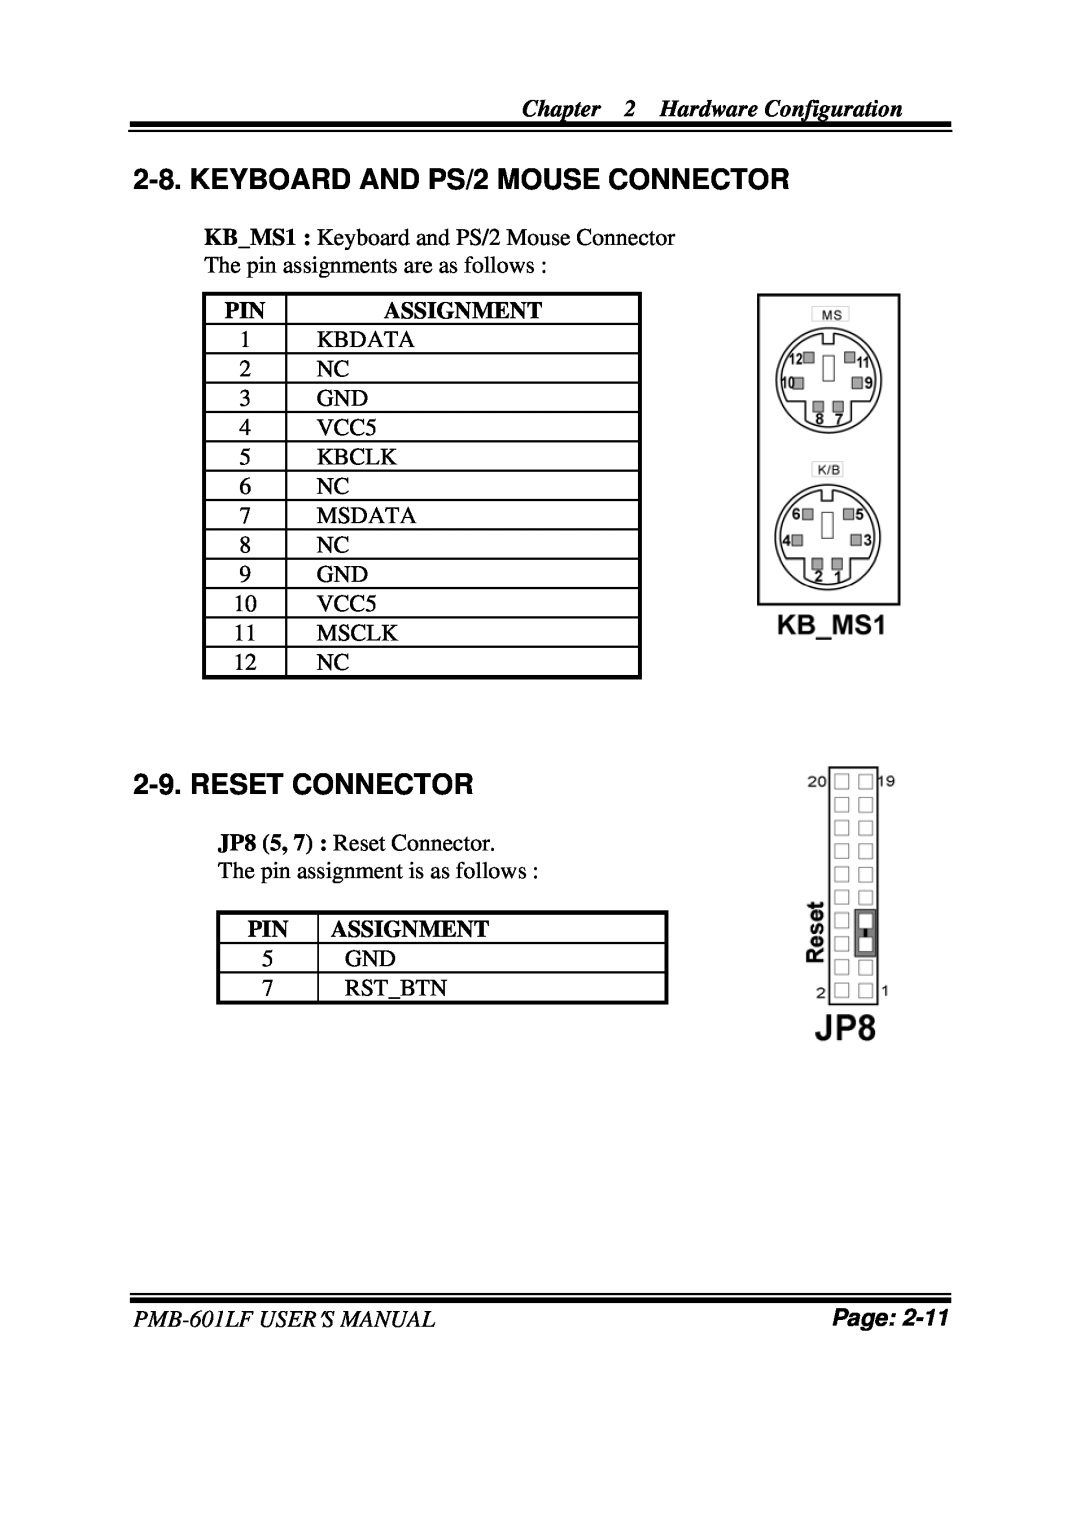 Intel PMB-601LF user manual KEYBOARD AND PS/2 MOUSE CONNECTOR, Reset Connector, Hardware Configuration, Assignment, Page 